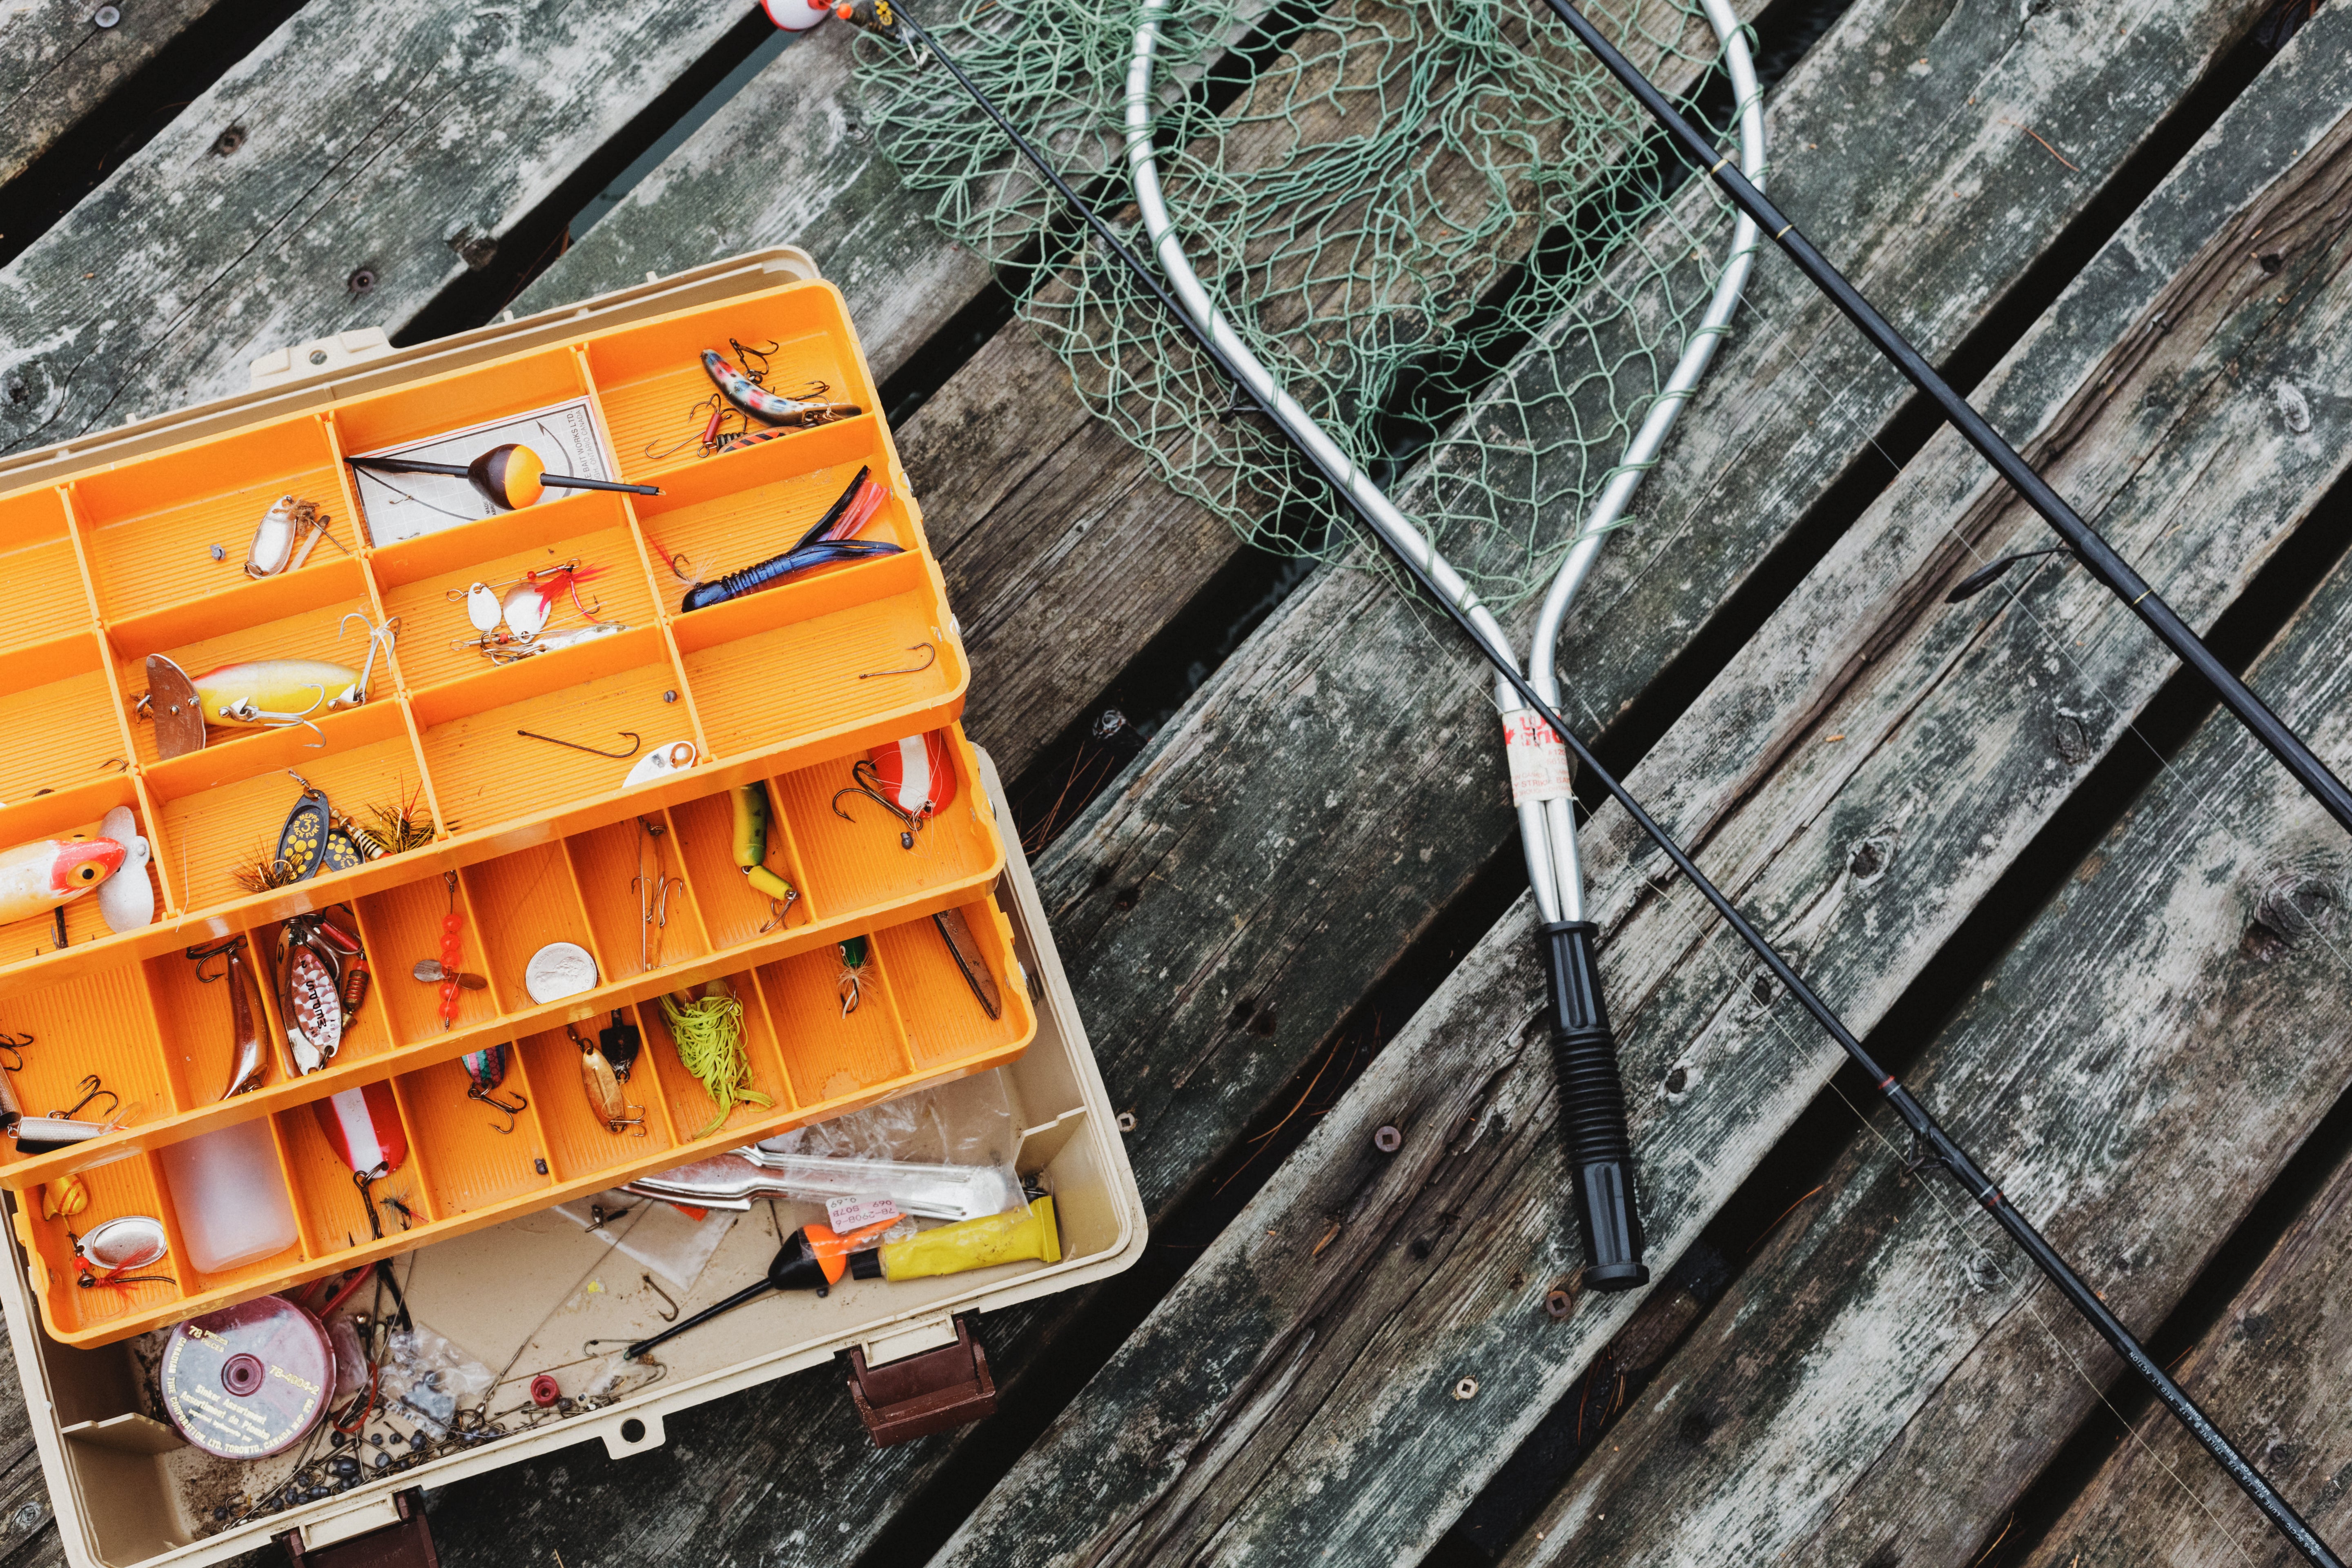 Free Fishing Tackle On Dock Image: Browse 1000s of Pics